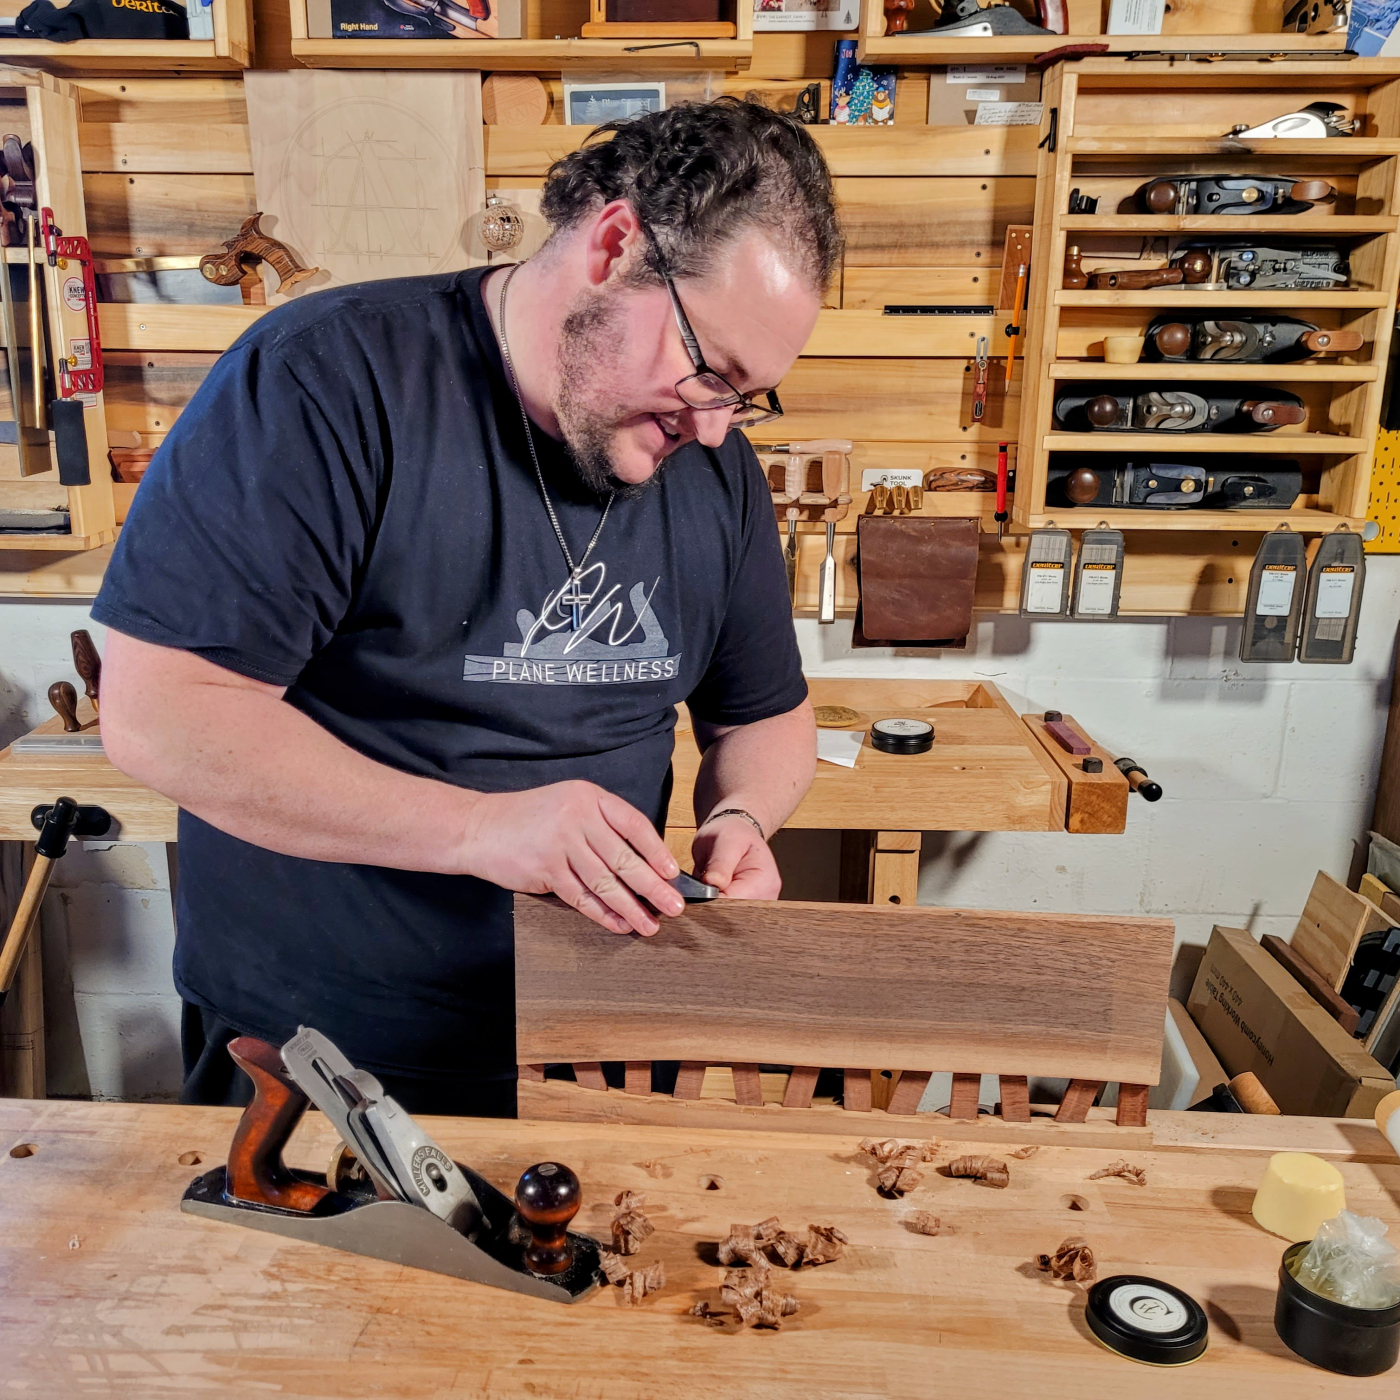 Woodworking Gifts Series: Test Your Limits or Take it Easy - Woodworking  Blog